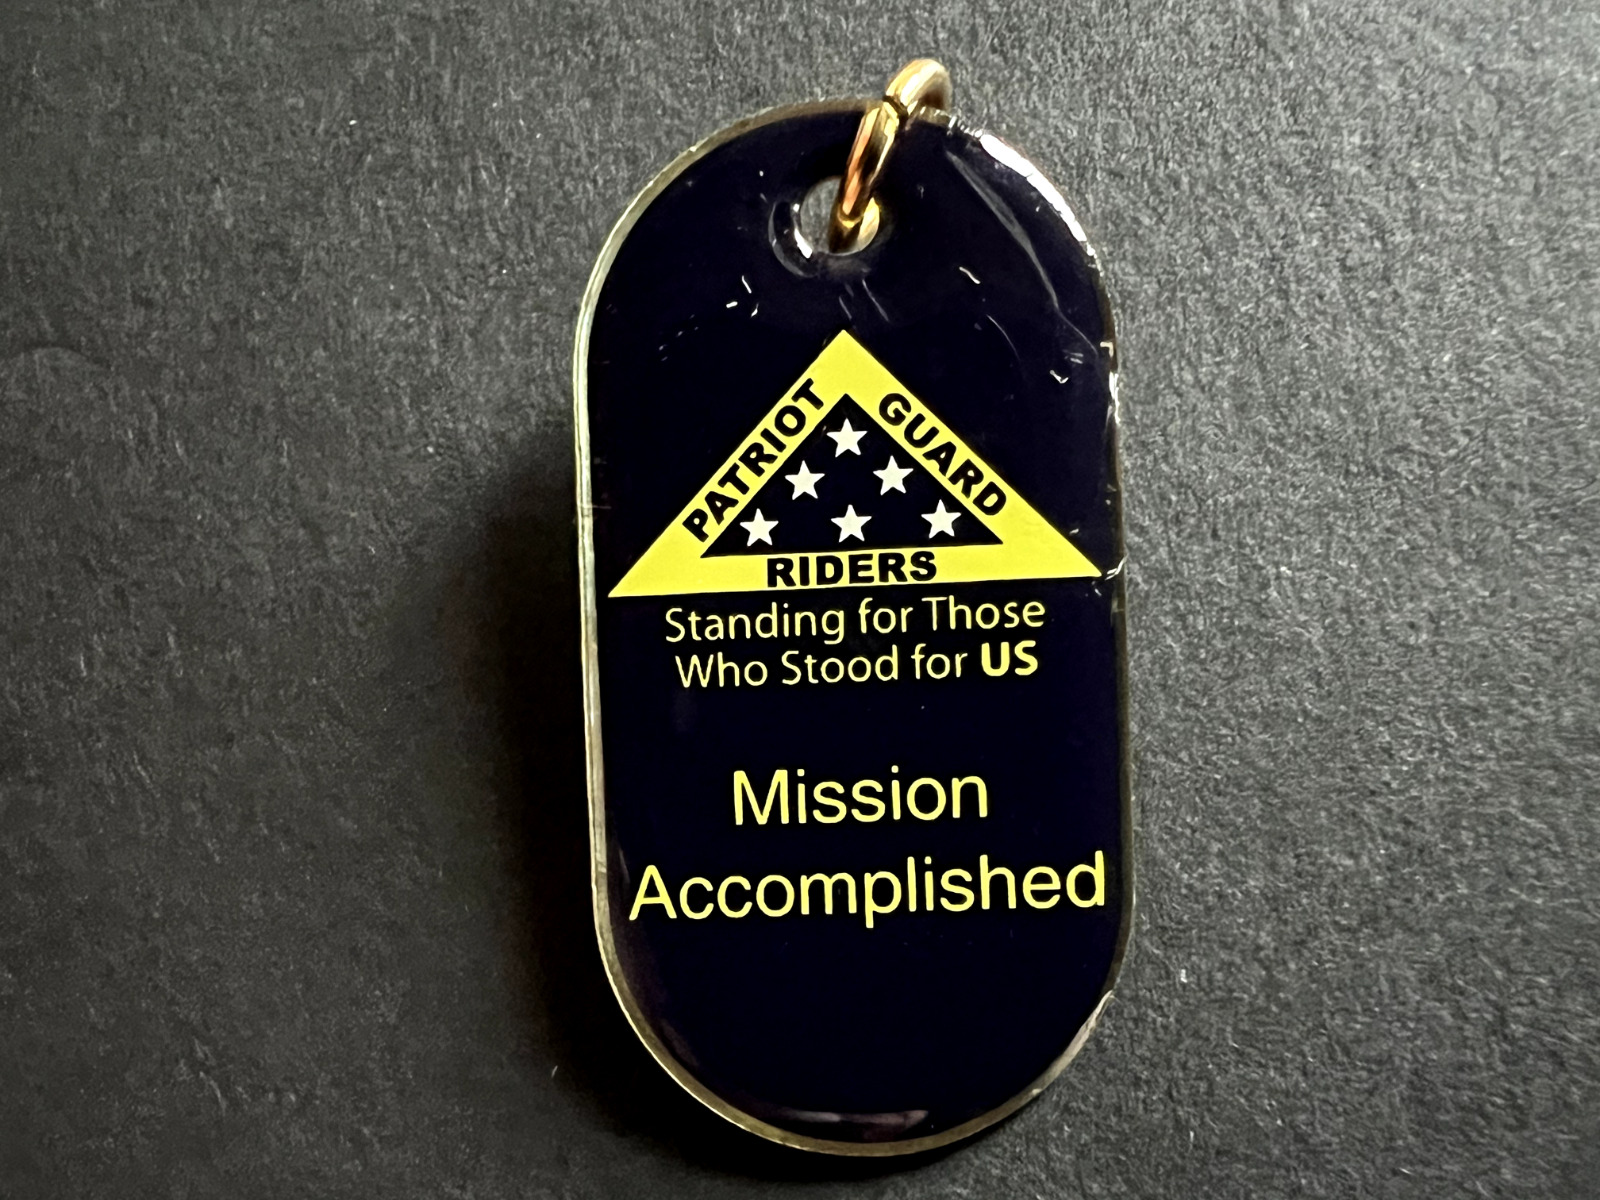 Patriot Guard Rider Mission Accomplished Stand for US Motorcycle Jacket Vest Pin